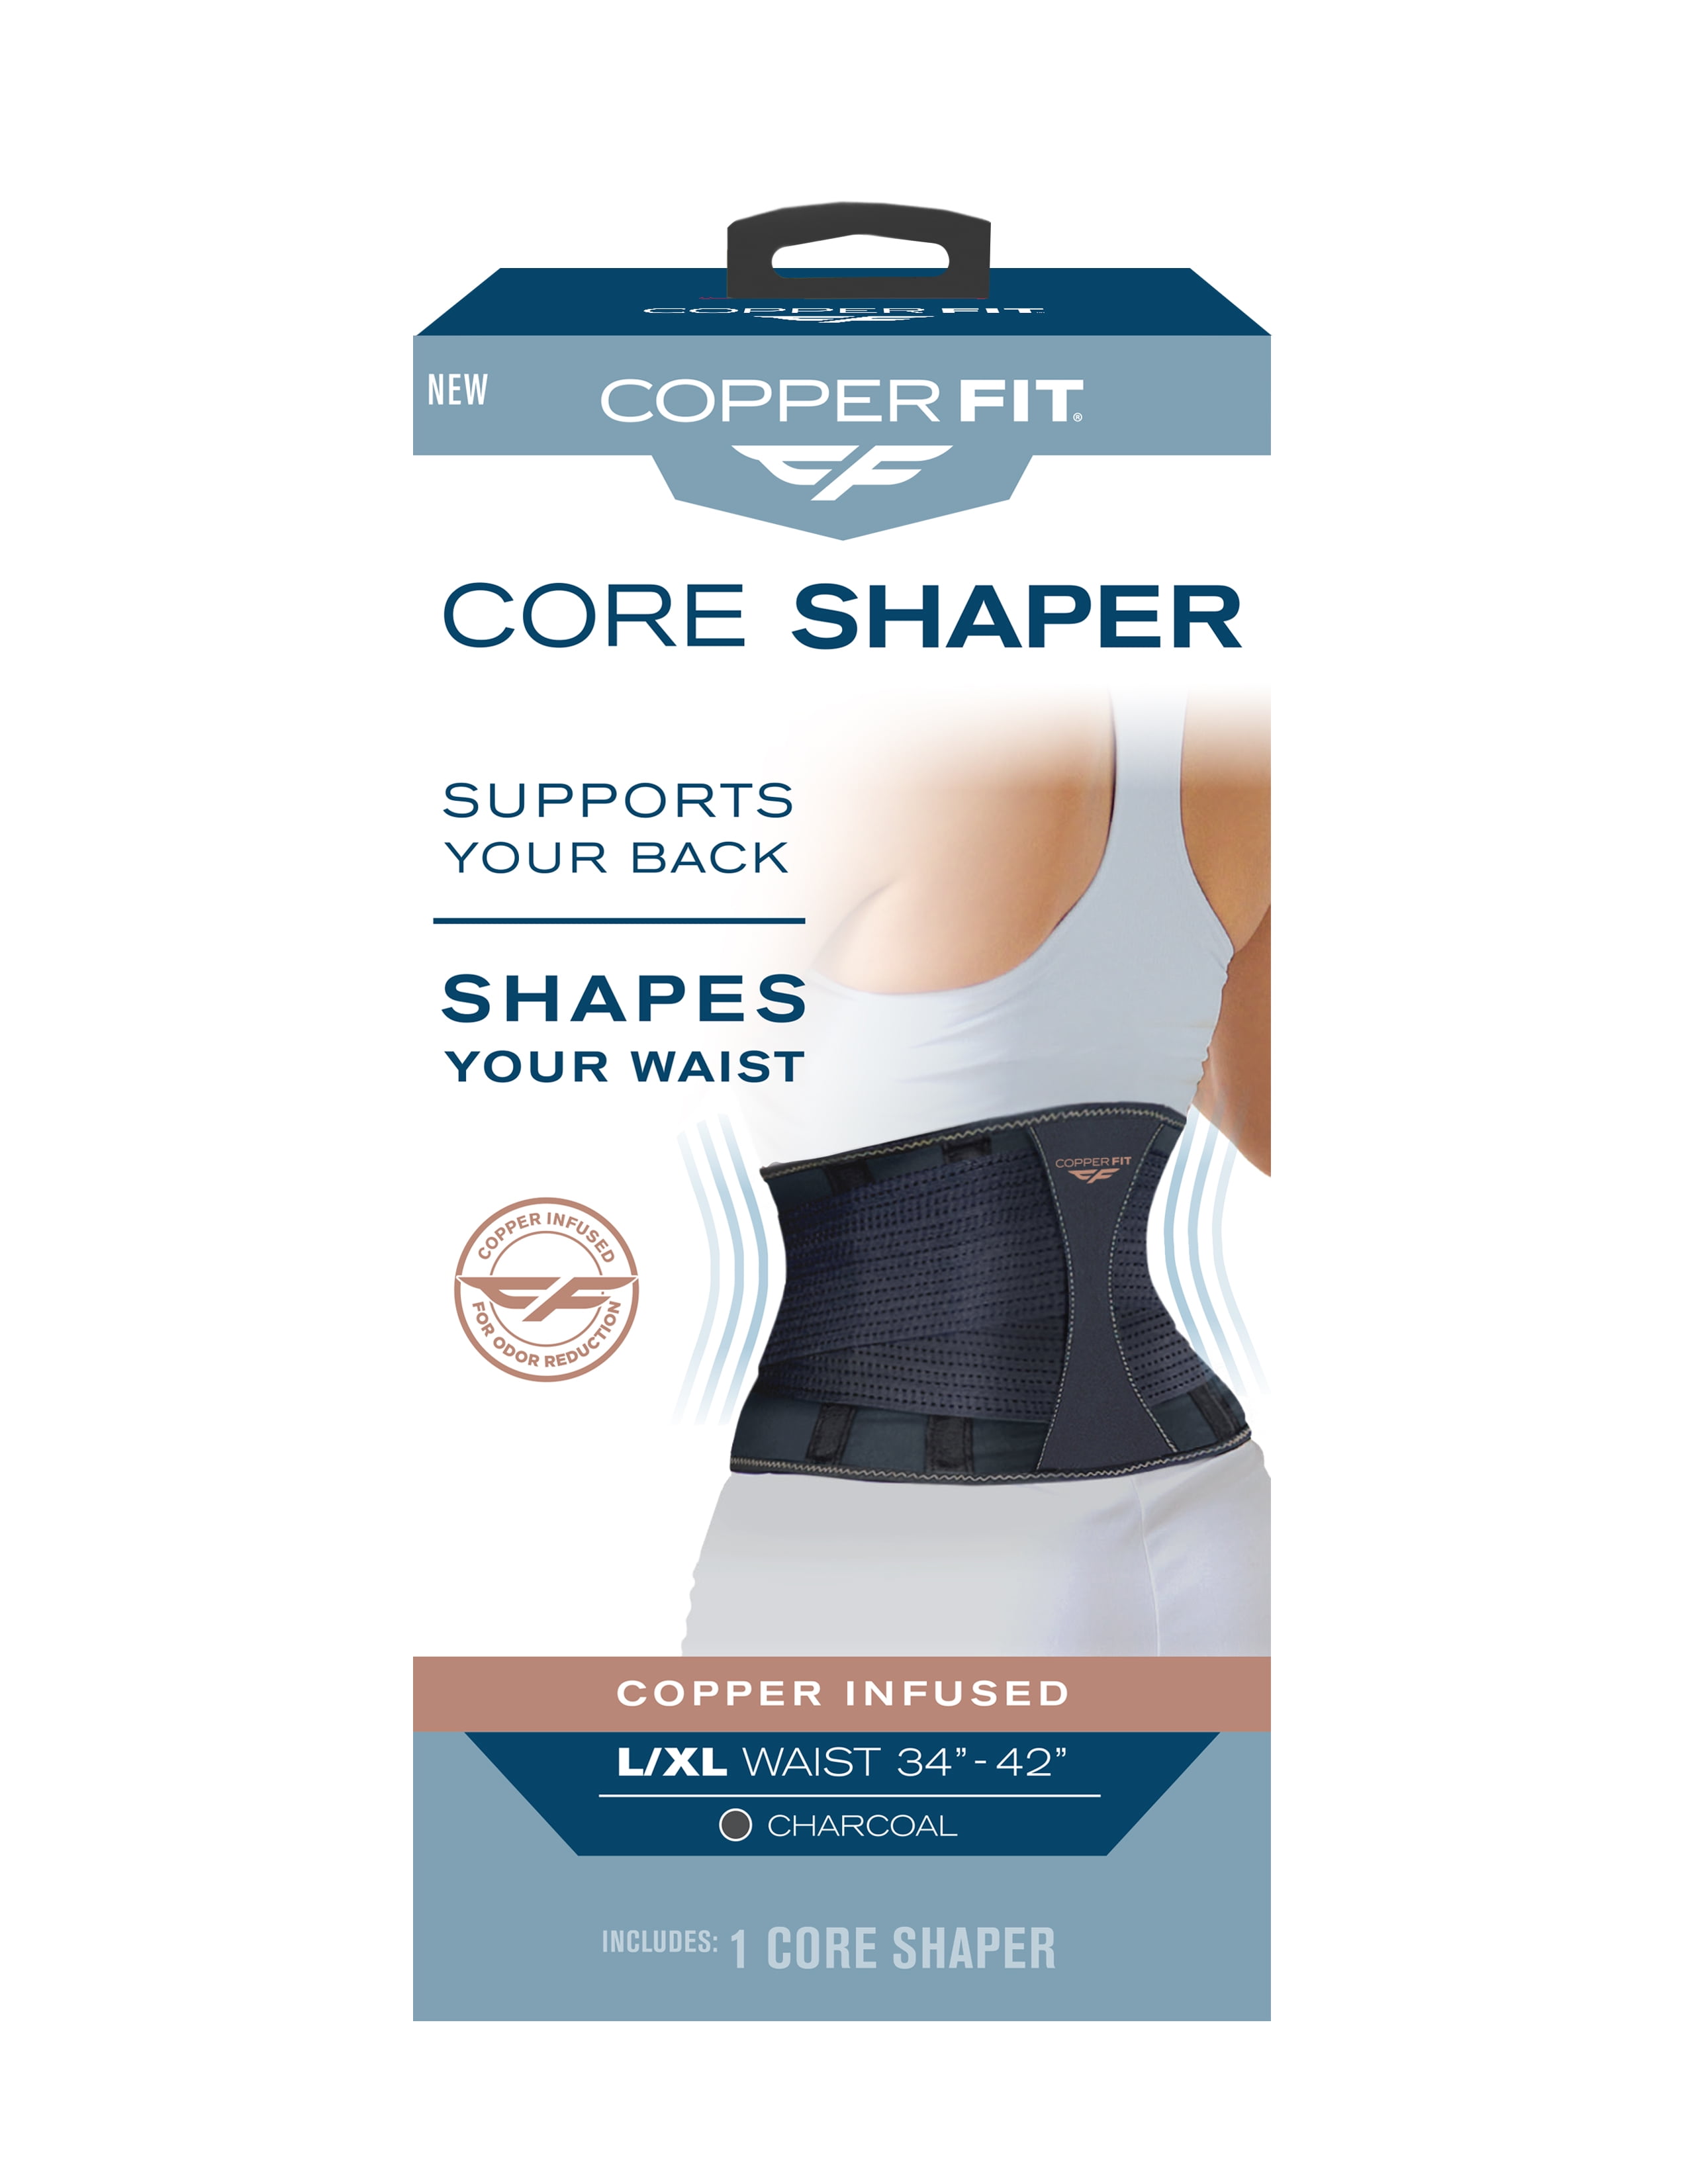 Copper Infused Fit Core Waist Shaper/Back Support S/M 26-34 Charcoal NEW  BOX